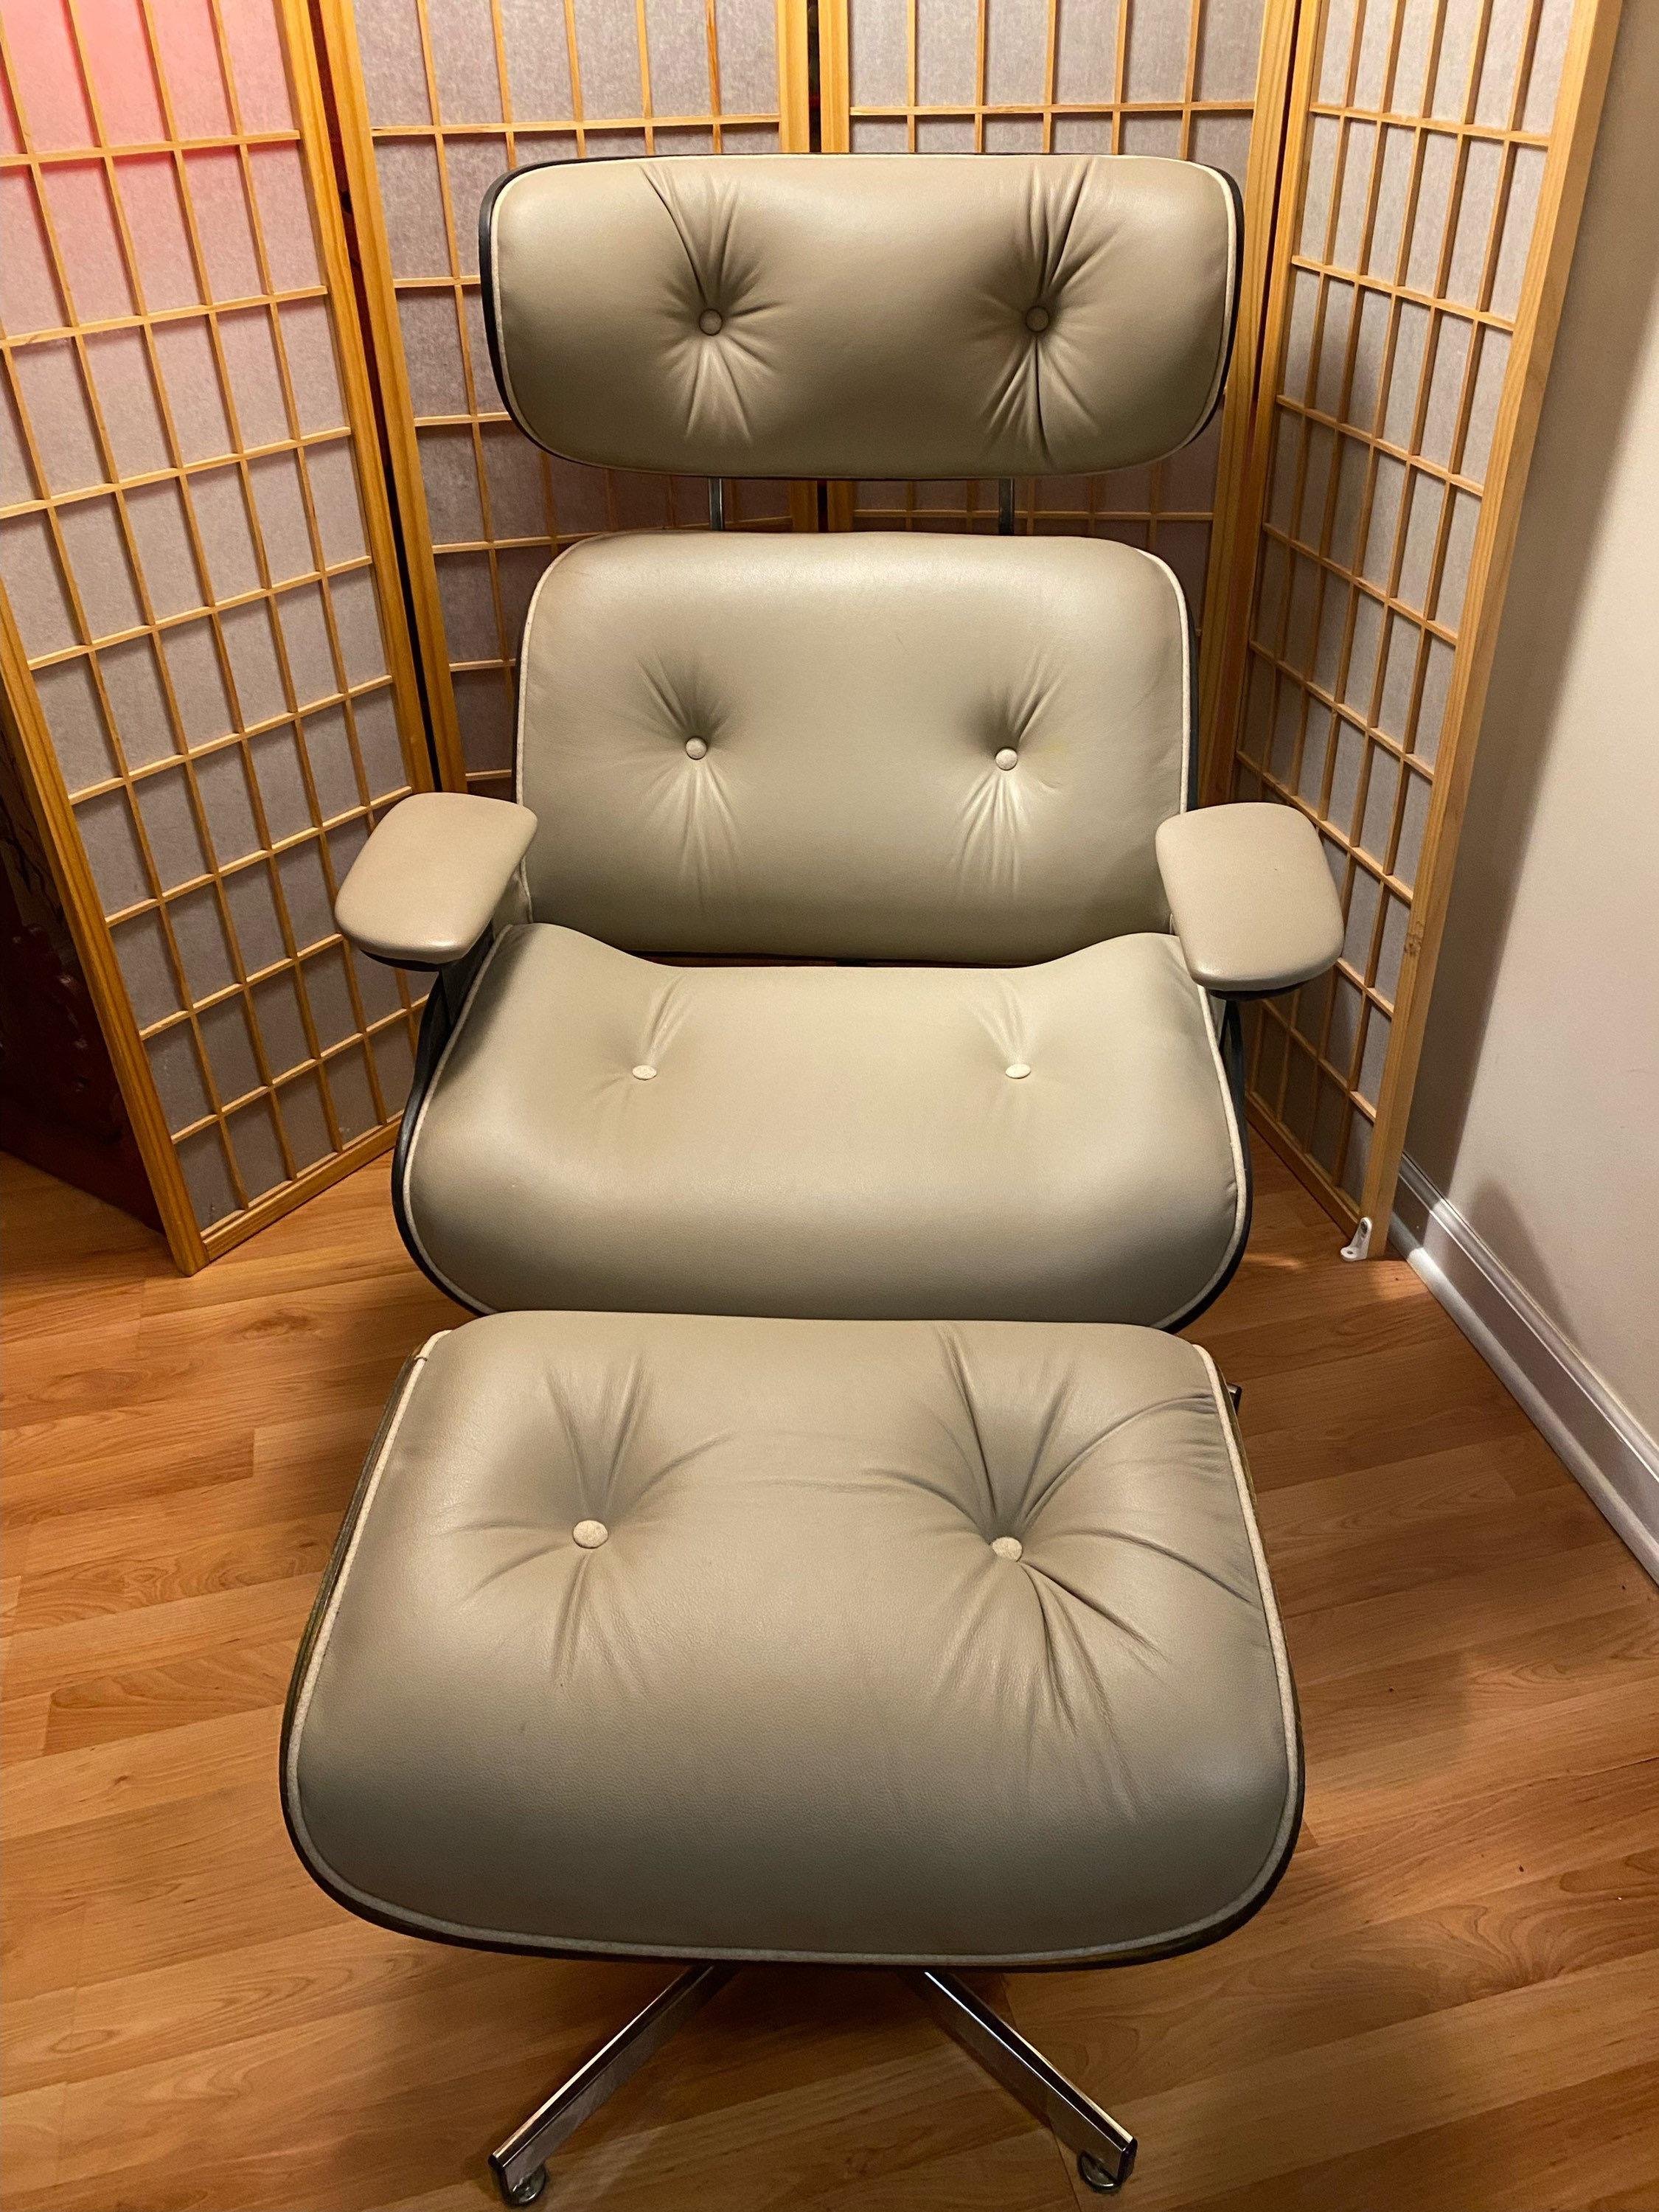 Mid-Century Modern Plycraft Lounge Chair and Ottoman New Upholstered Leather - 2 Piece Set 

The chair was newly upholstered with a Holly Hunt Leather. The chair is in a great condition and ready to go to a new home. Super comfy! 

circa